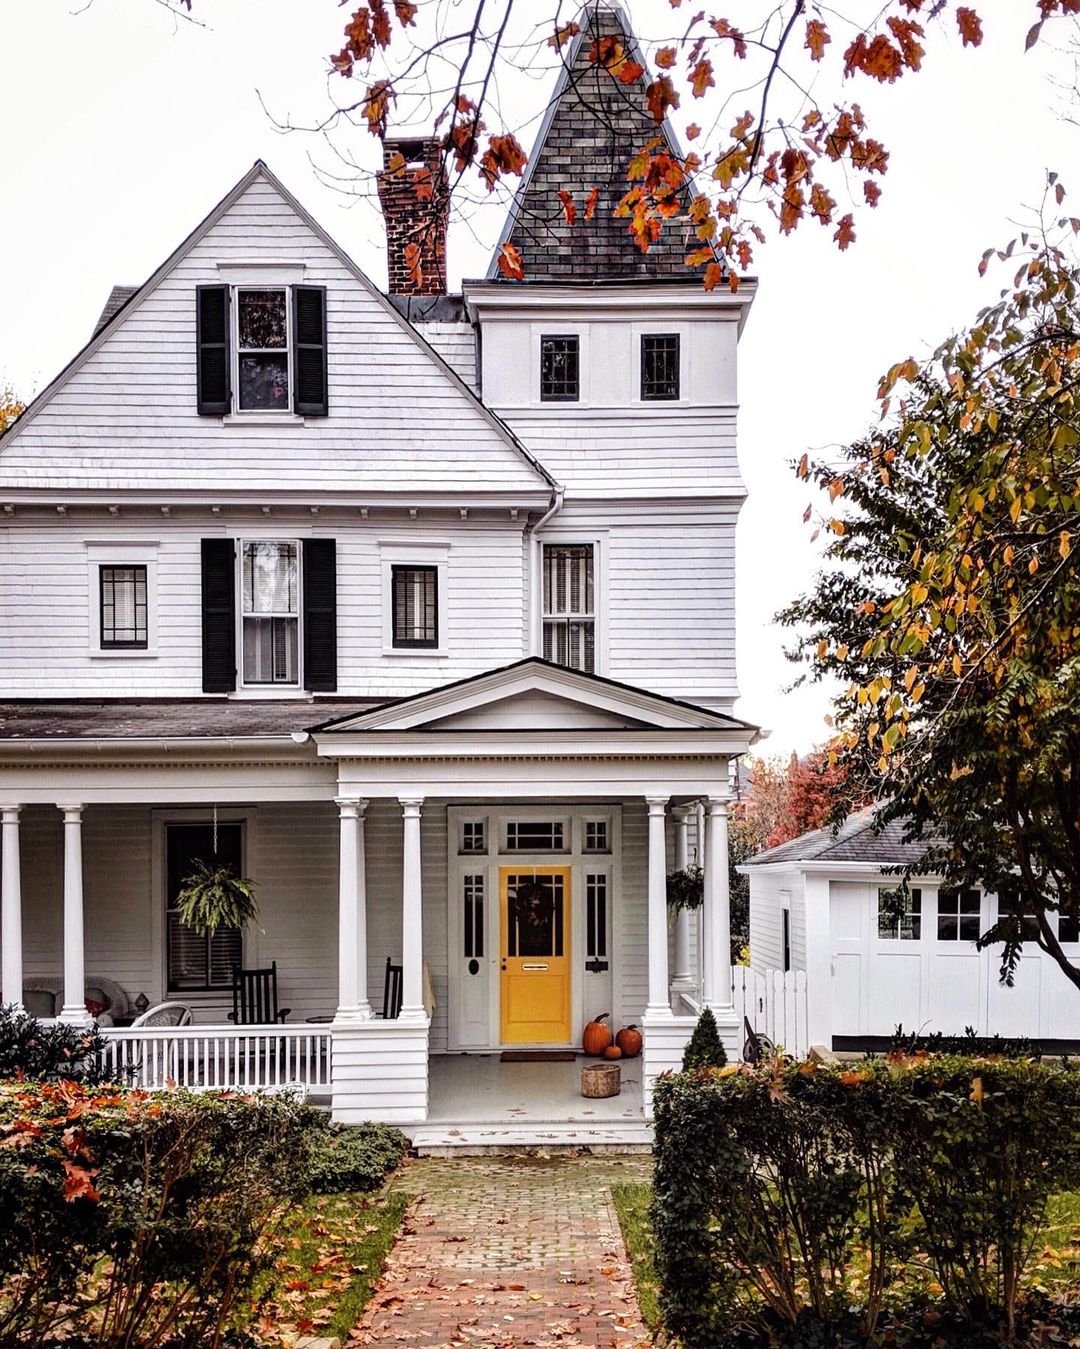 Three-story home in Cleveland Park, Washington, DC. Photo by Instagram user @frenchieyankee.